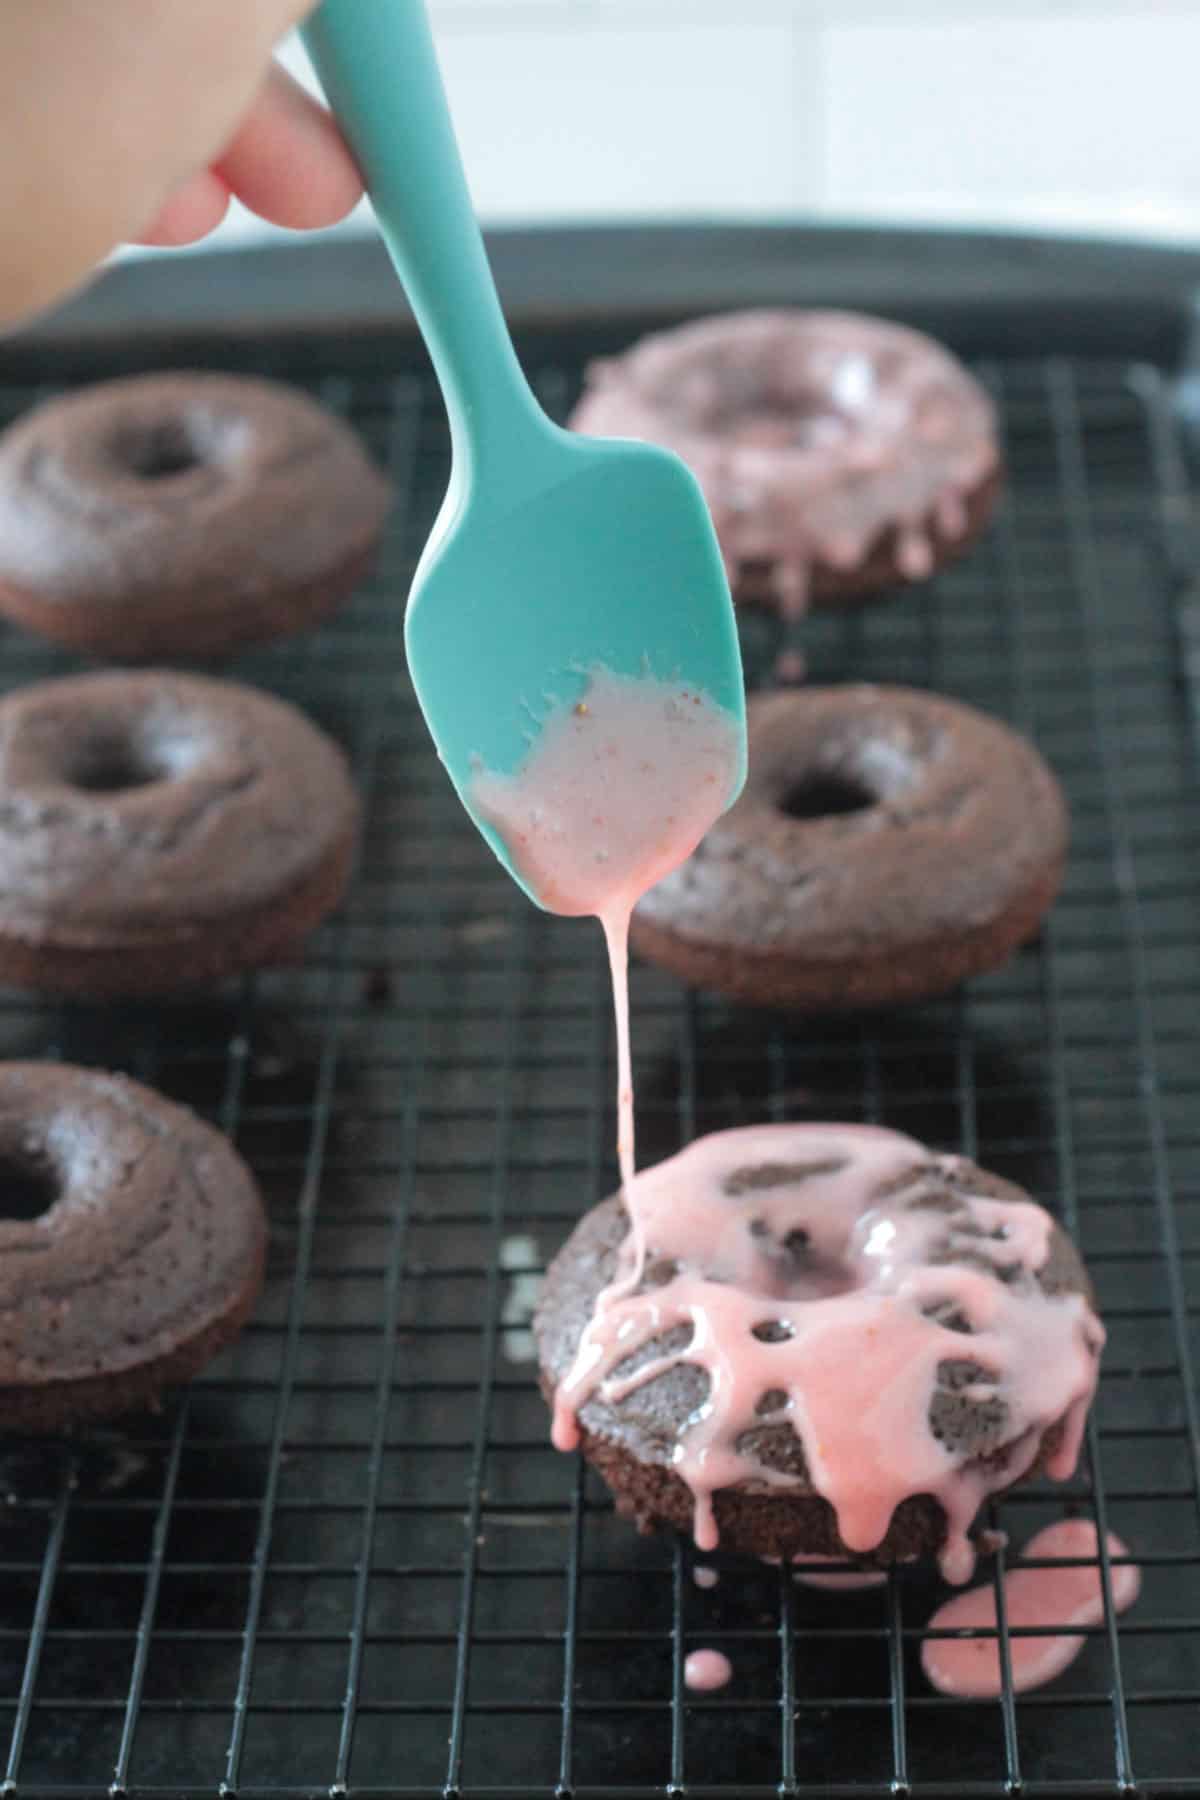 Pink icing being drizzled onto a chocolate donut from a small blue spatula.